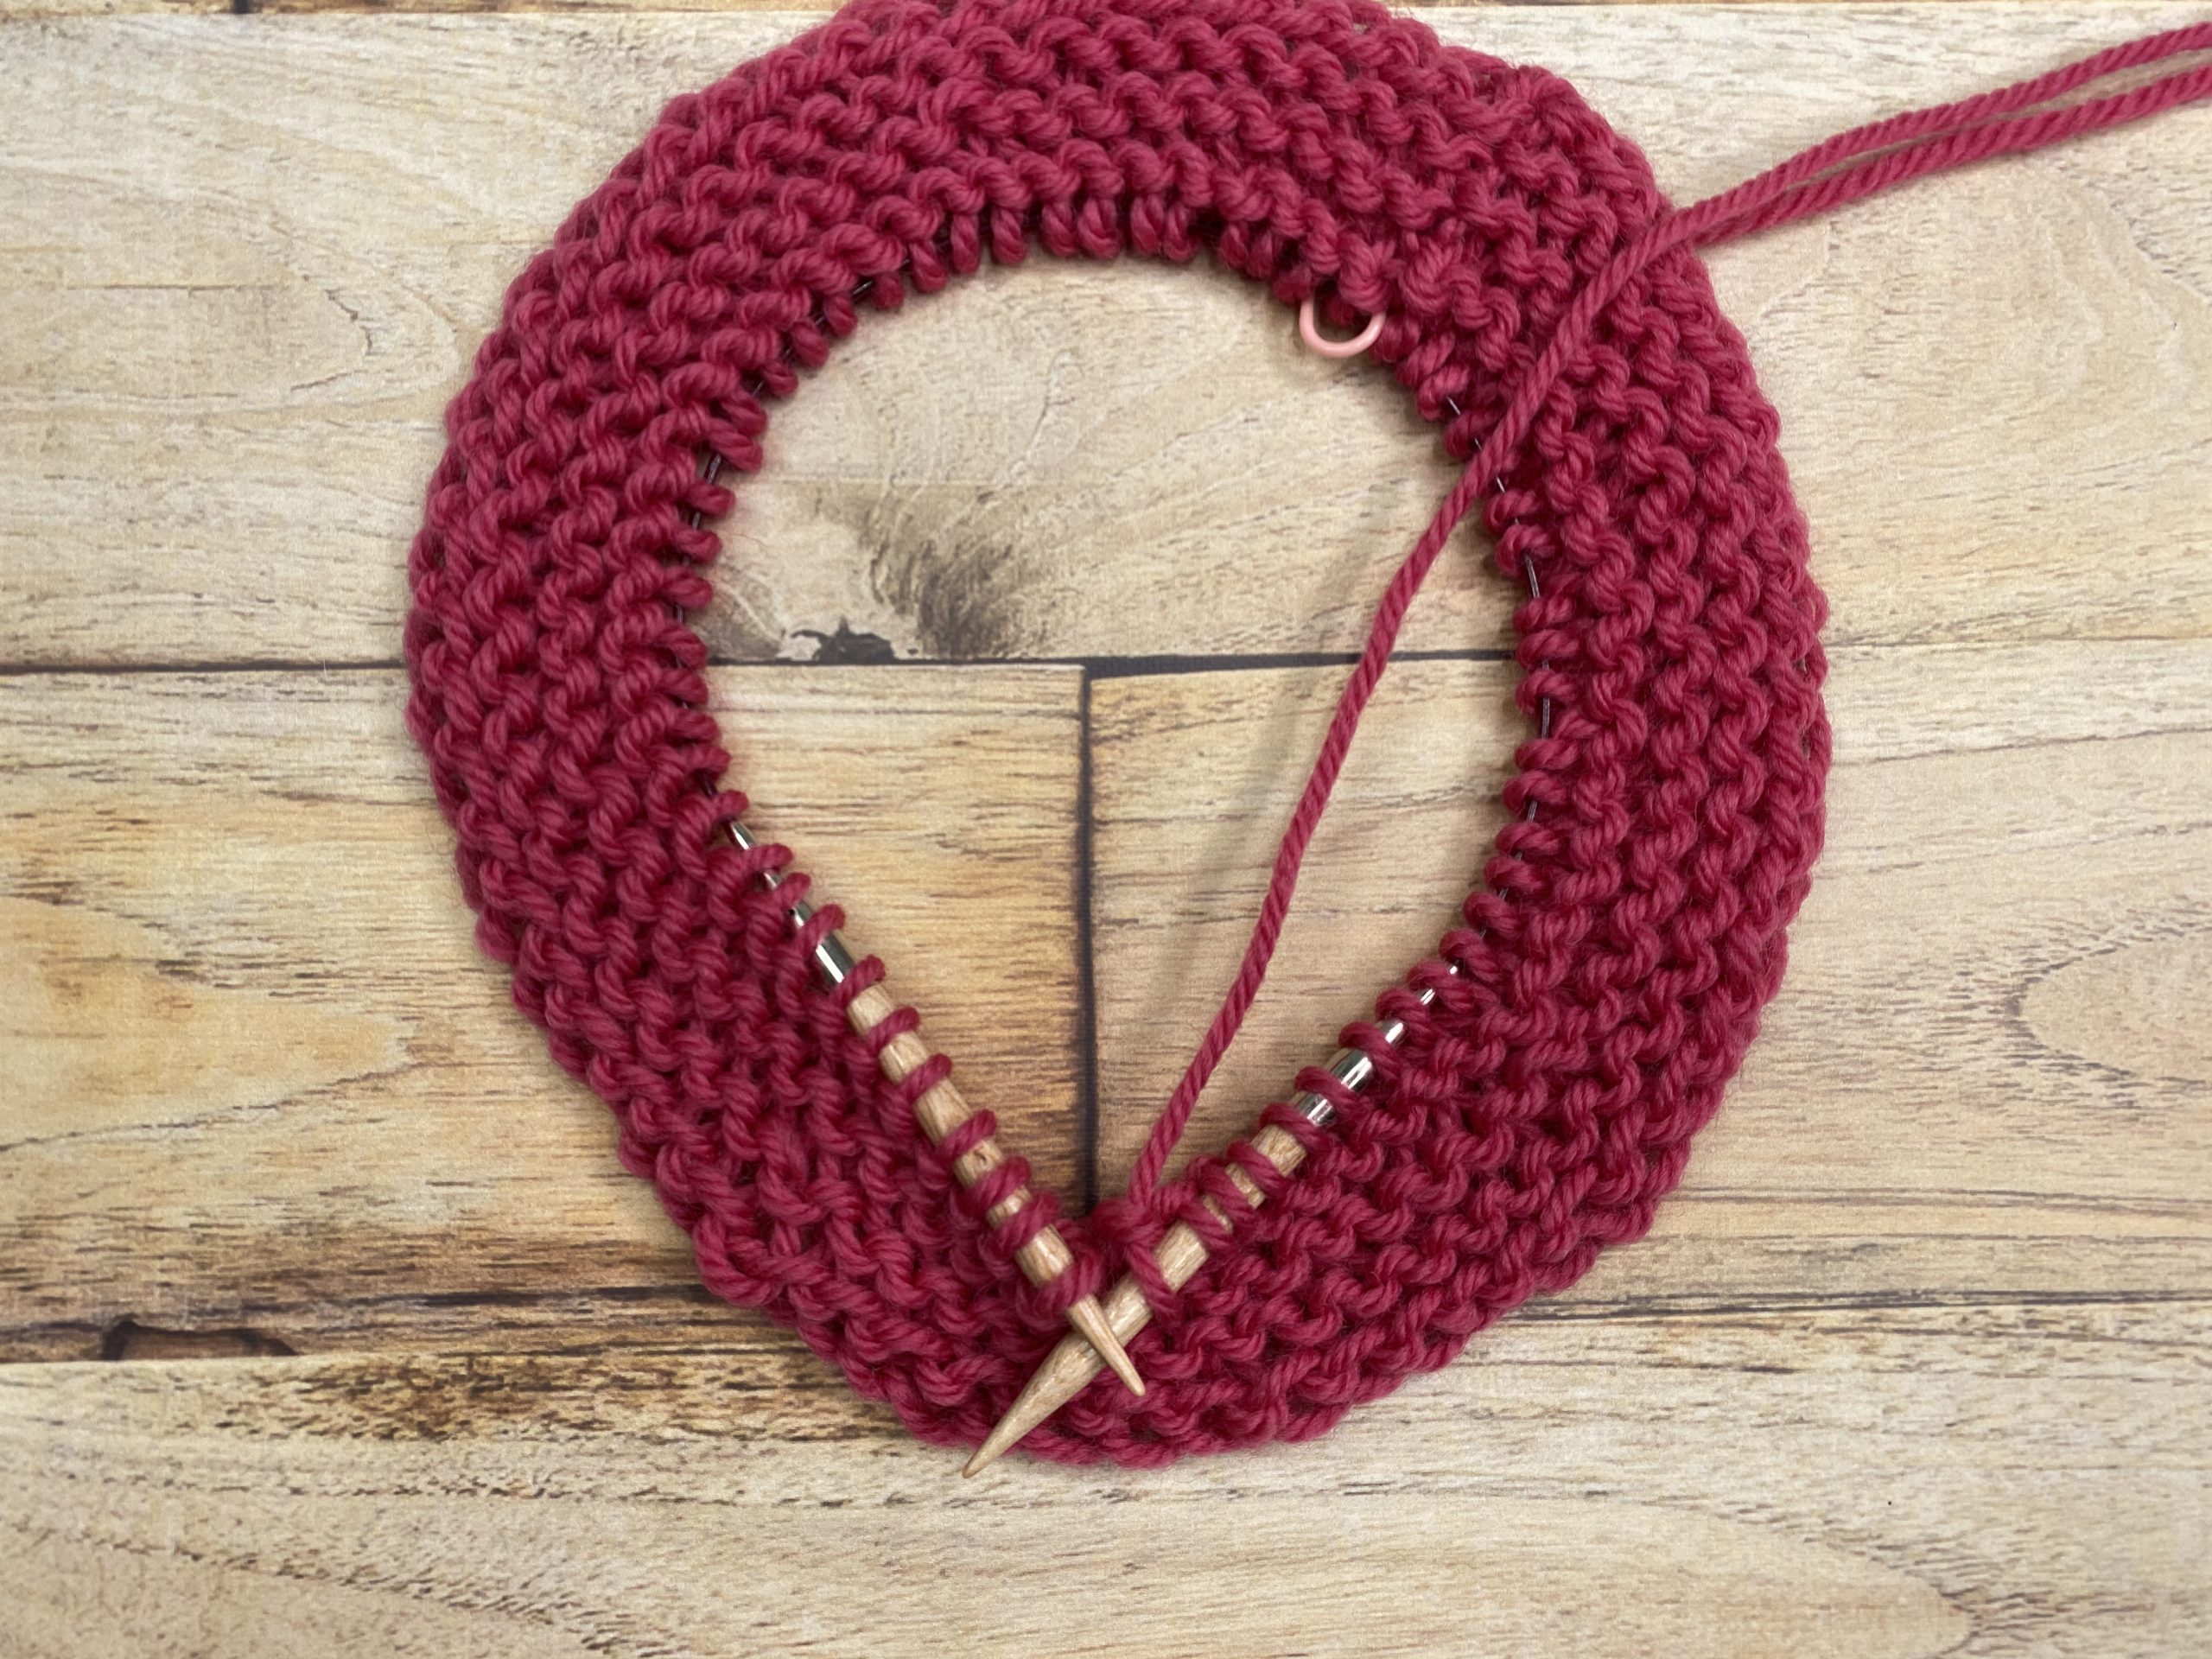 HOW I KNIT on 9 inch circular knitting needles in a round